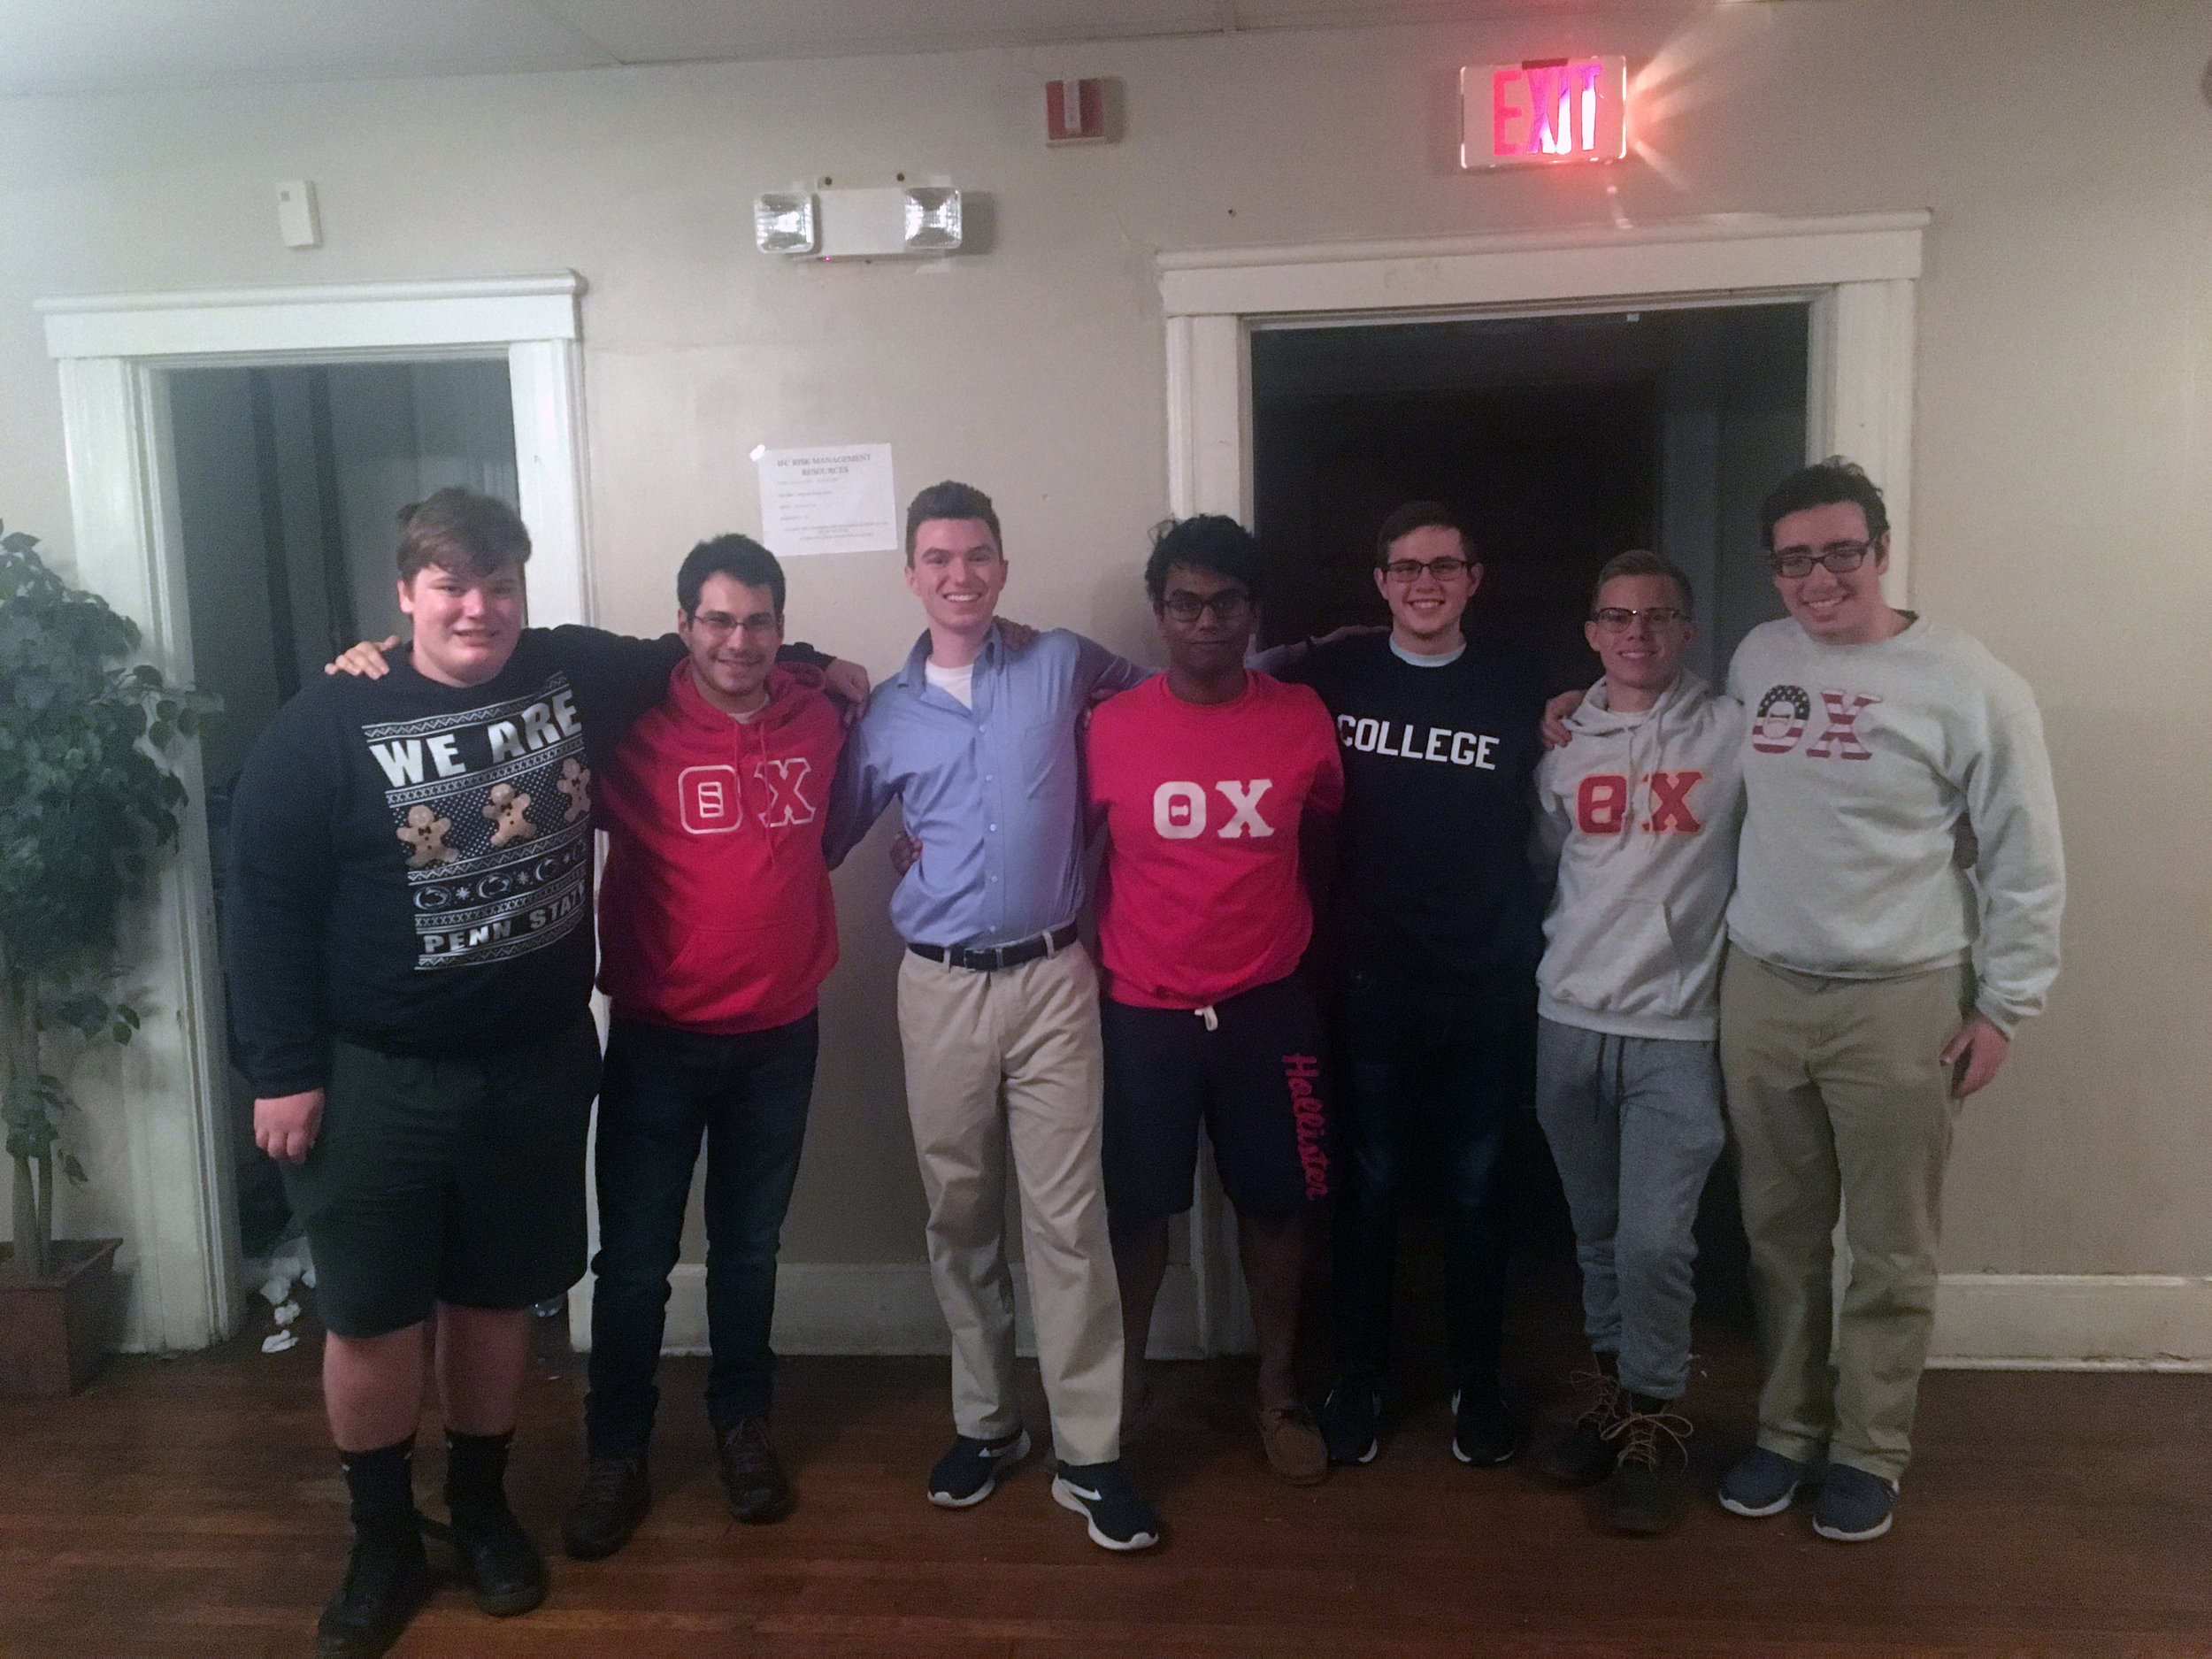  Newly Initiated brothers with their Marshal, (from left to right): Nick, Jeremy, Trey, Kawsar (Marshal), John, Jake, and Rob - Nov. 2018 